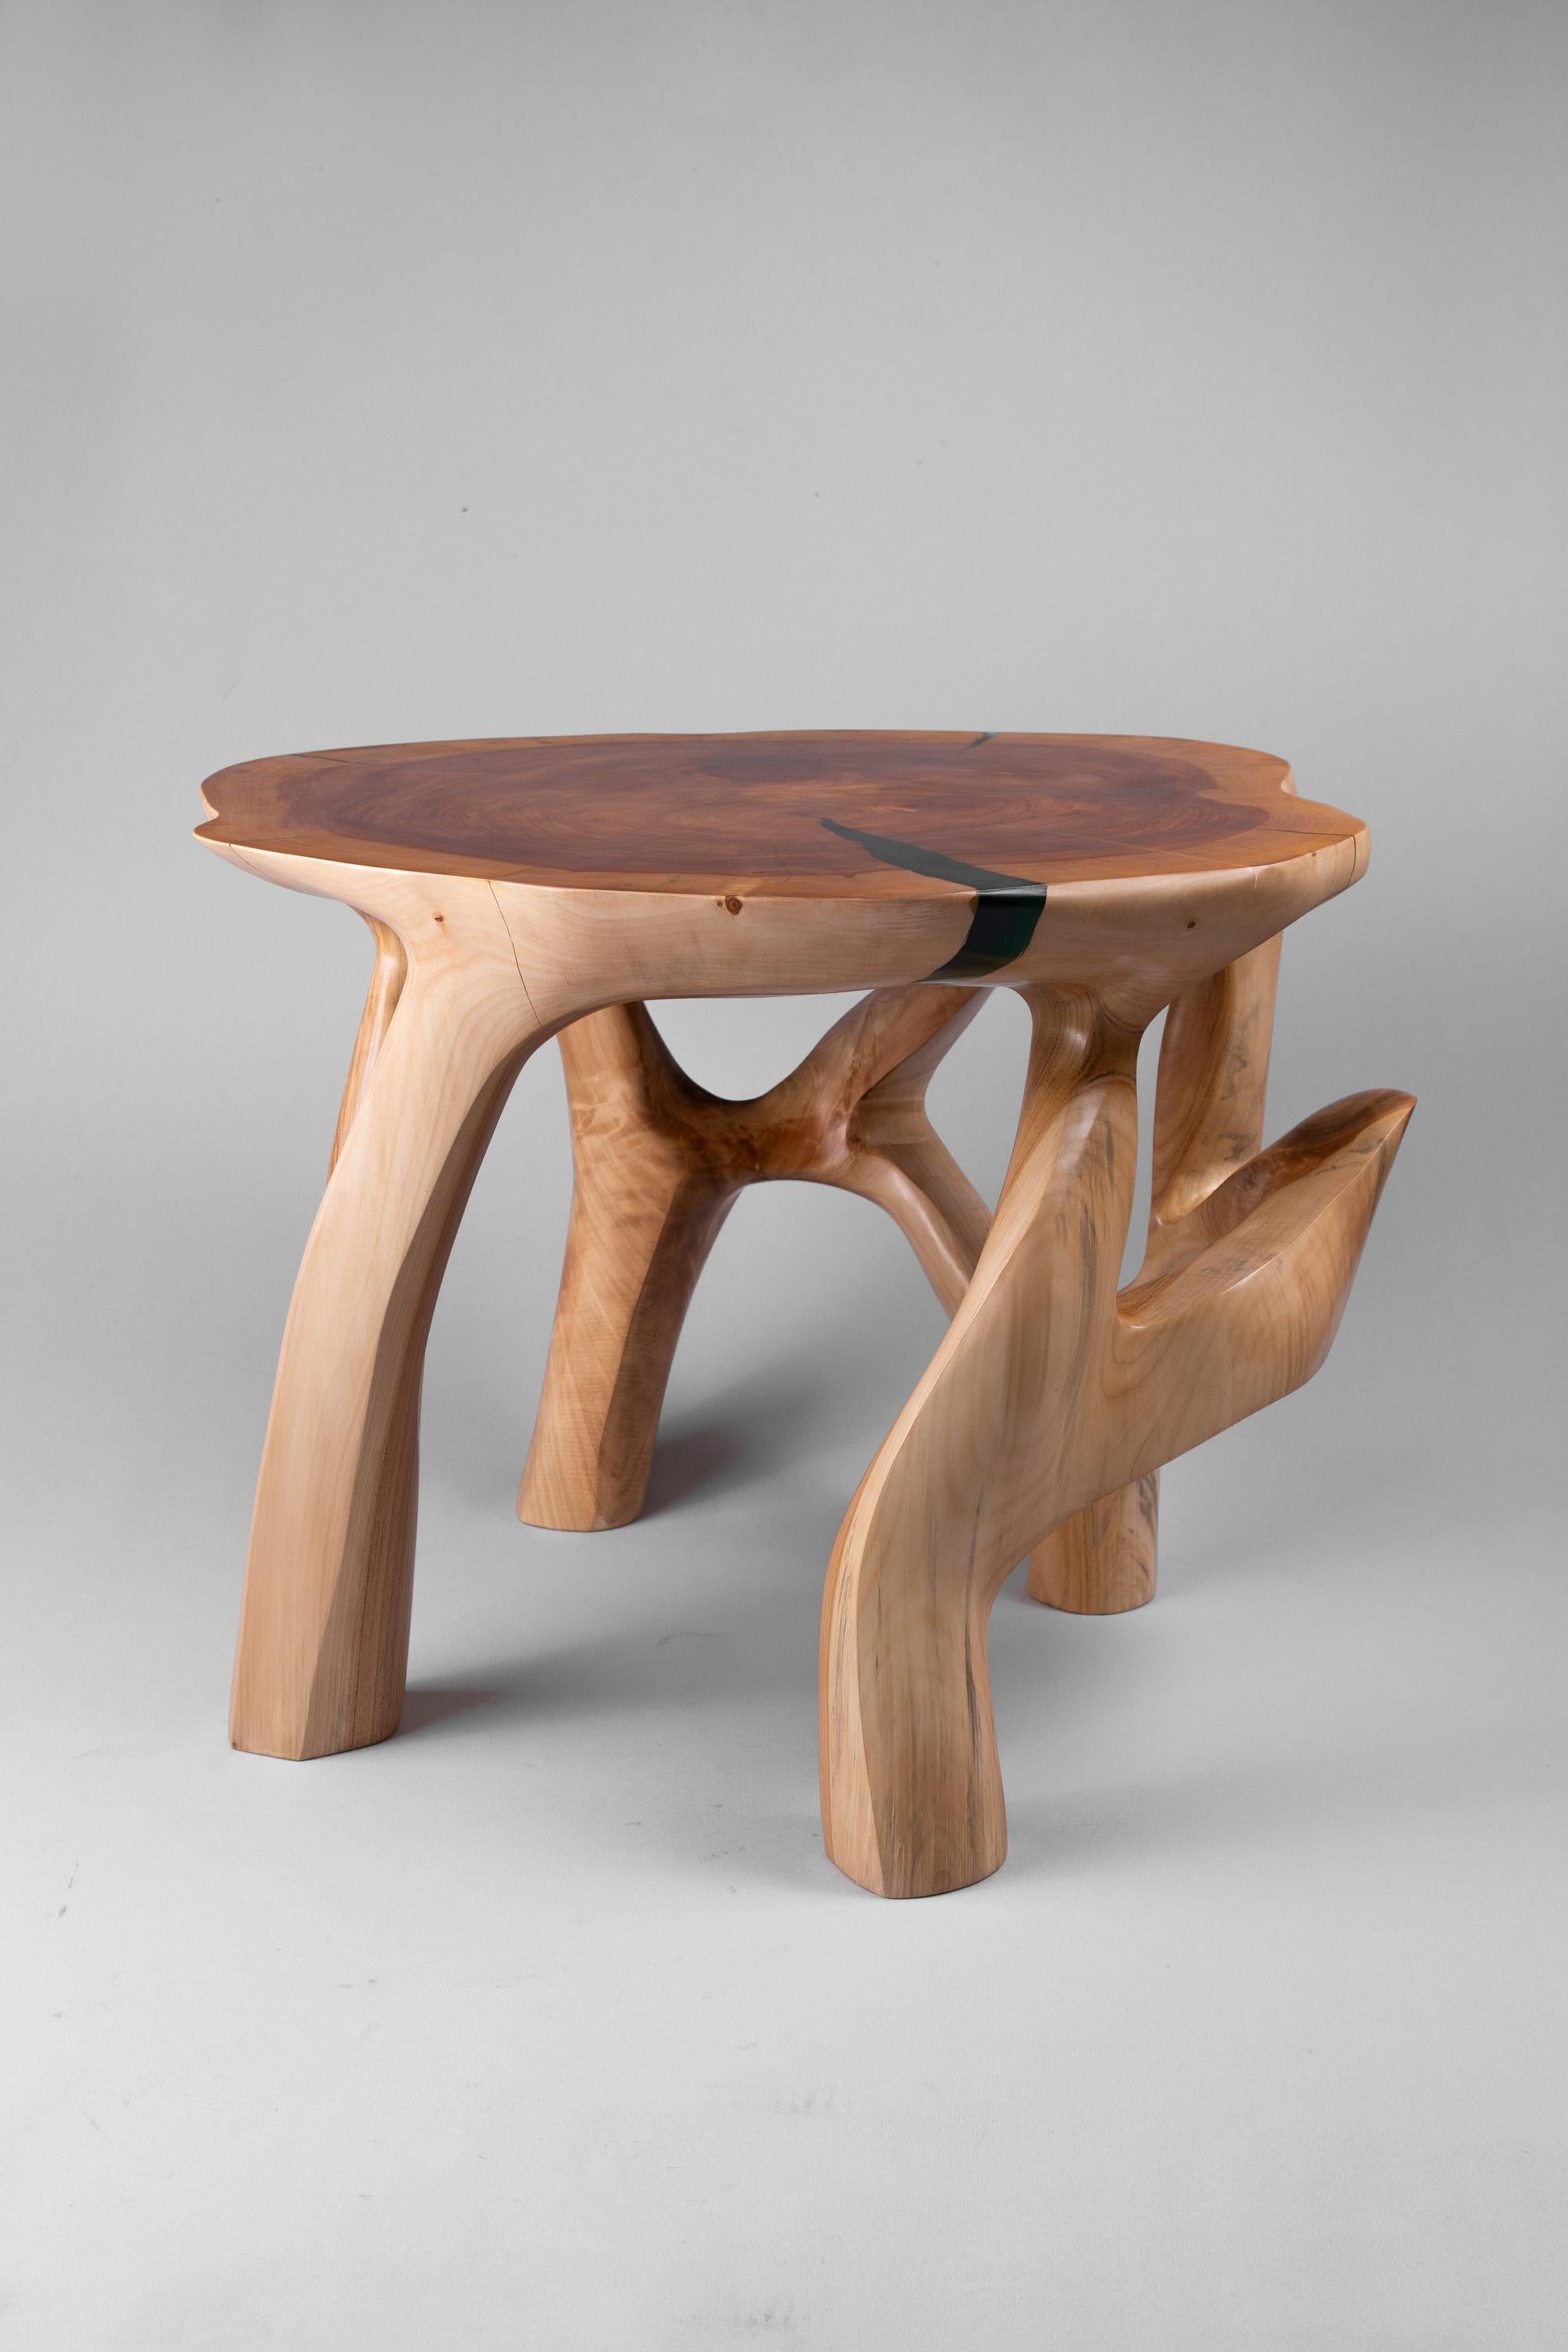 Domus is a coffee table made from a single block of wood.‎ The purpose of this coffee table is to be placed next to a warm hearth, a place where the whole family gathers and tells stories on long winter nights.‎ Functional sculpture carved from a